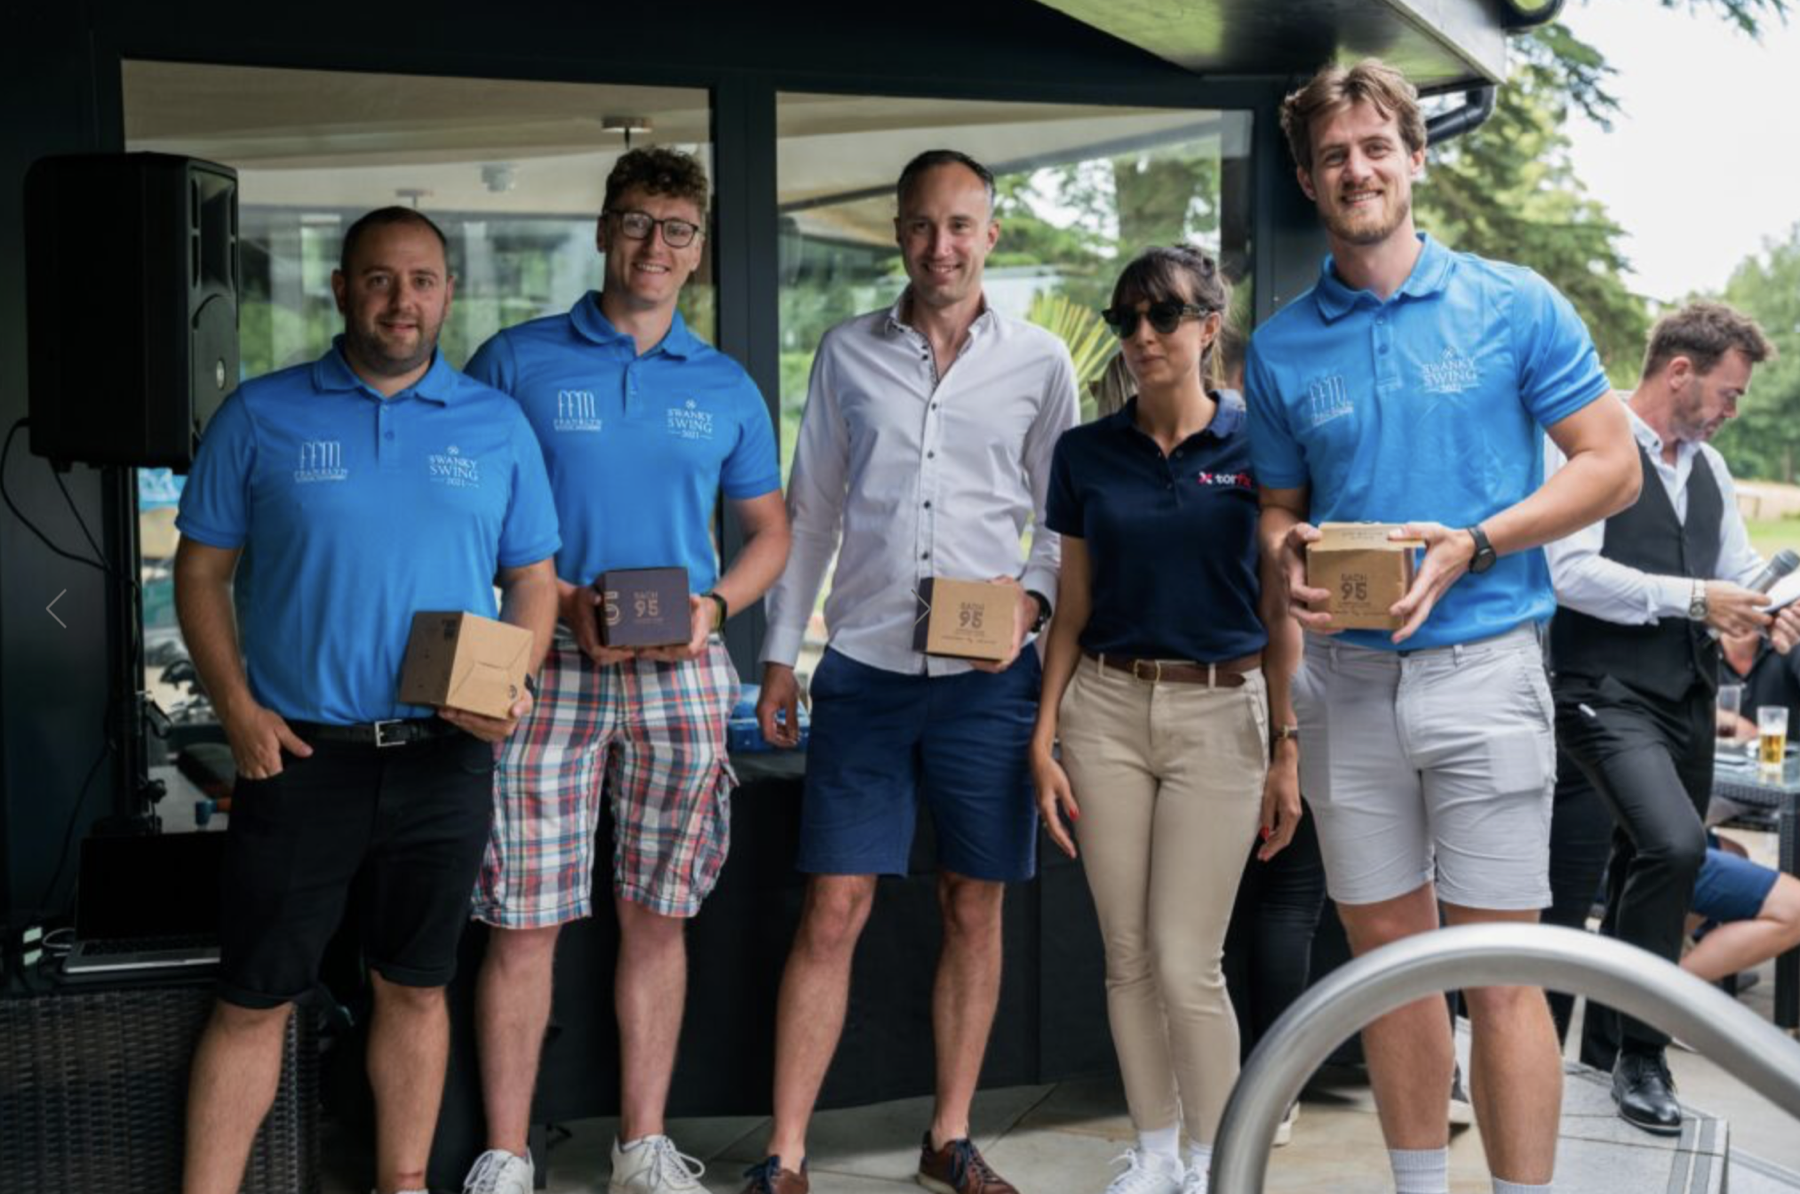  Winners of the Swanky Swing golf tournament, Langricks, presented with their prizes by Natalie Collins from TorFX 